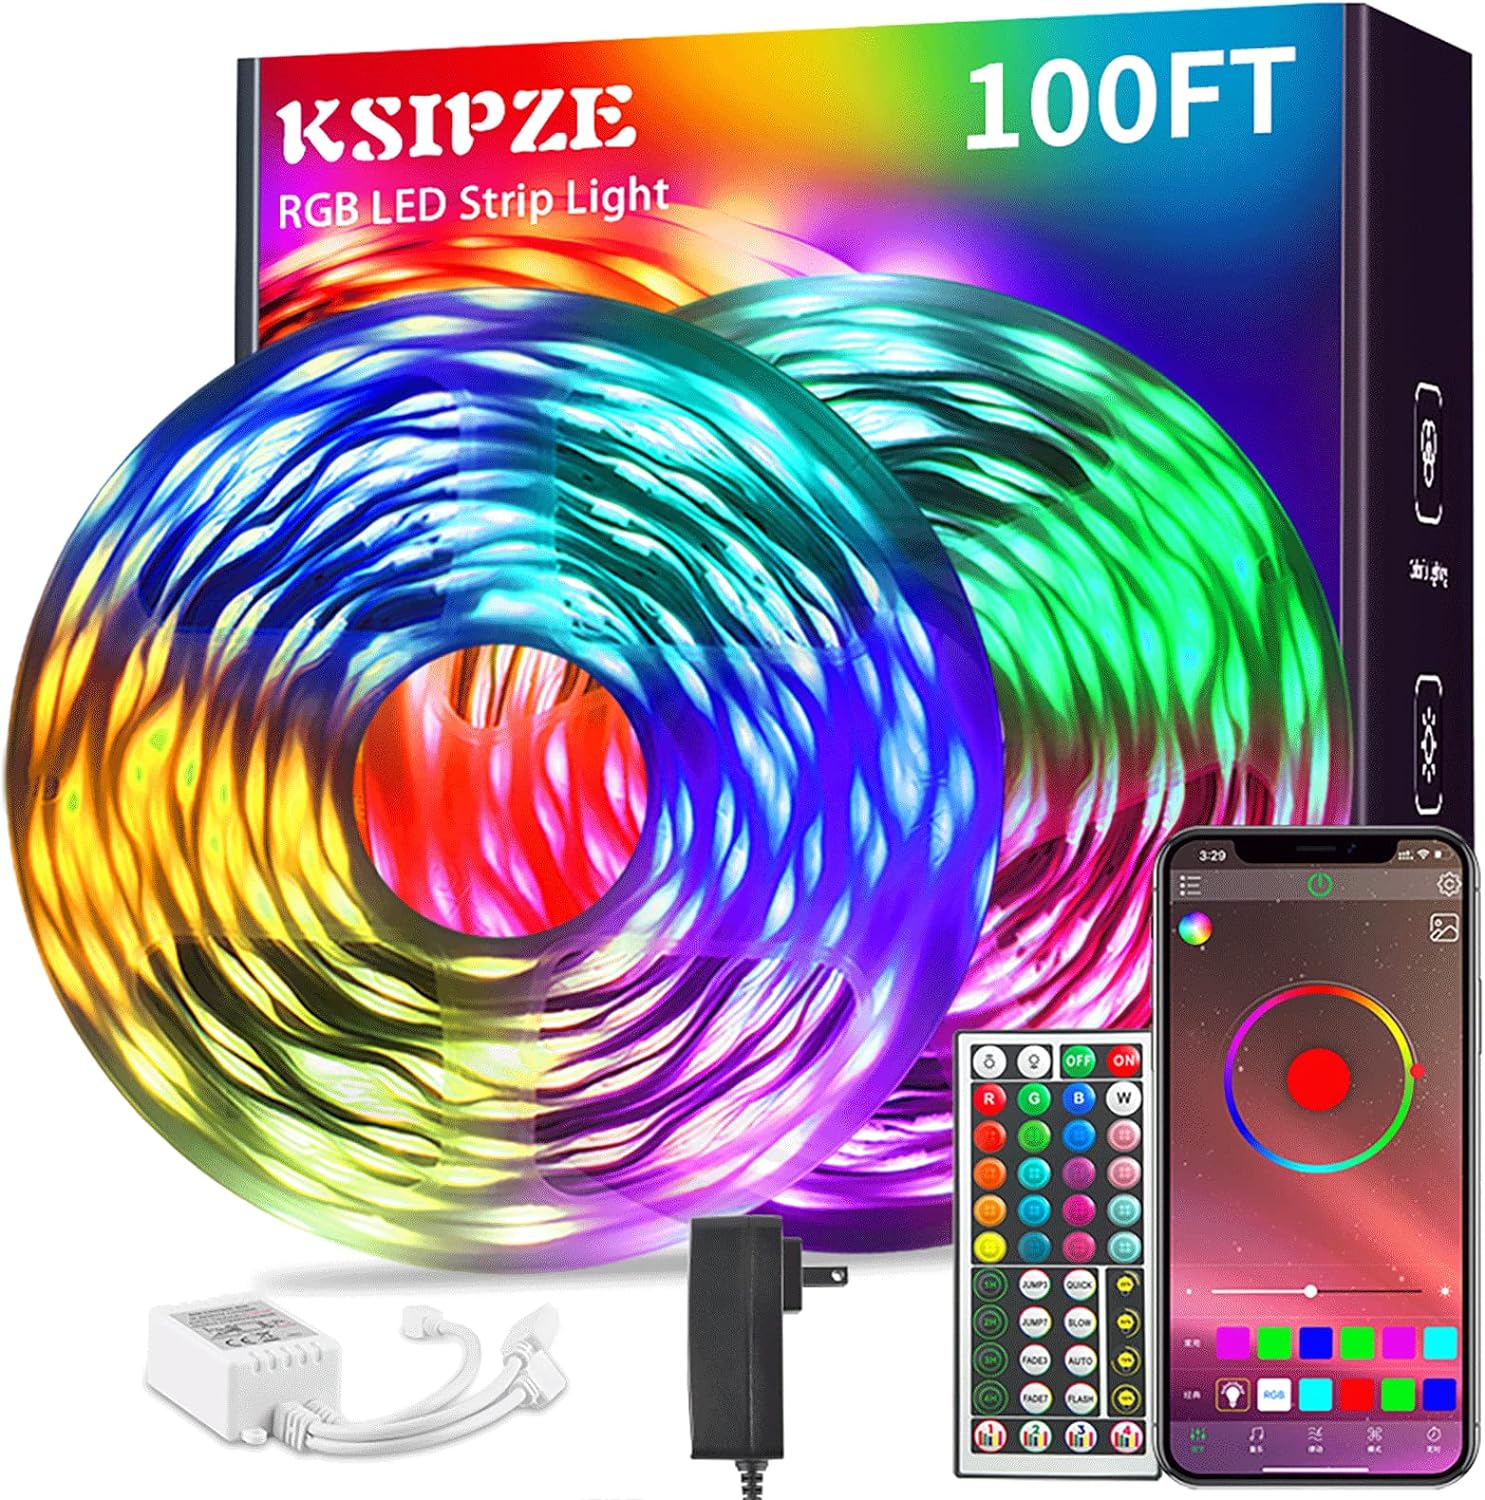 Ksipze 100ft Led Strip Lights RGB Music Sync Color Changing,Bluetooth Led Lights with Smart App Control Remote,Led Lights for B